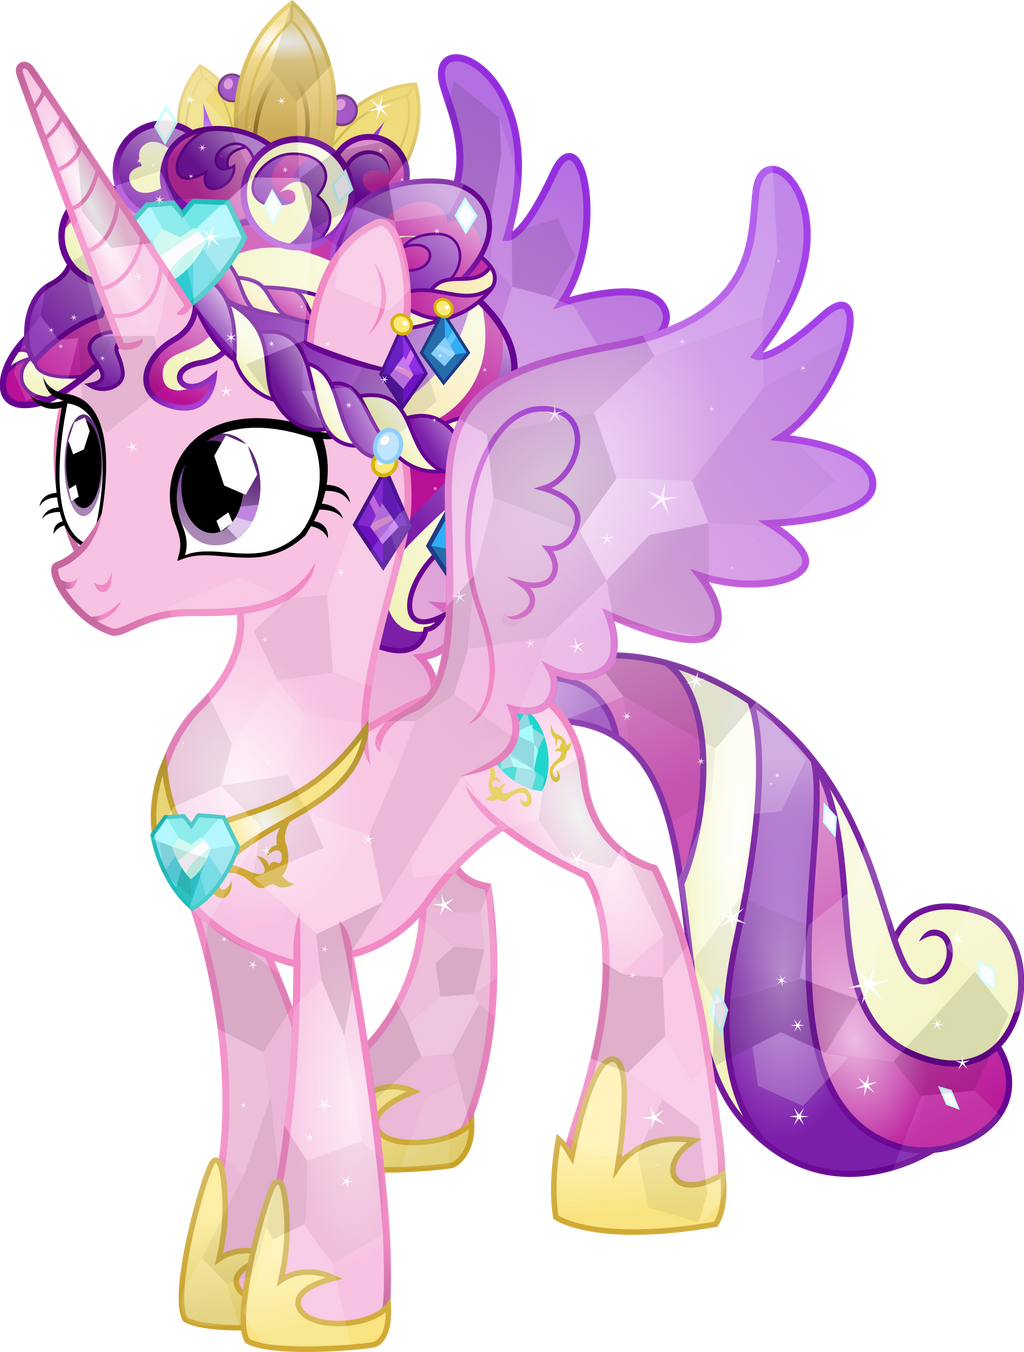 [Obrázek: behold_the_crystal_princess_by_theshadow...6sxm00.png]